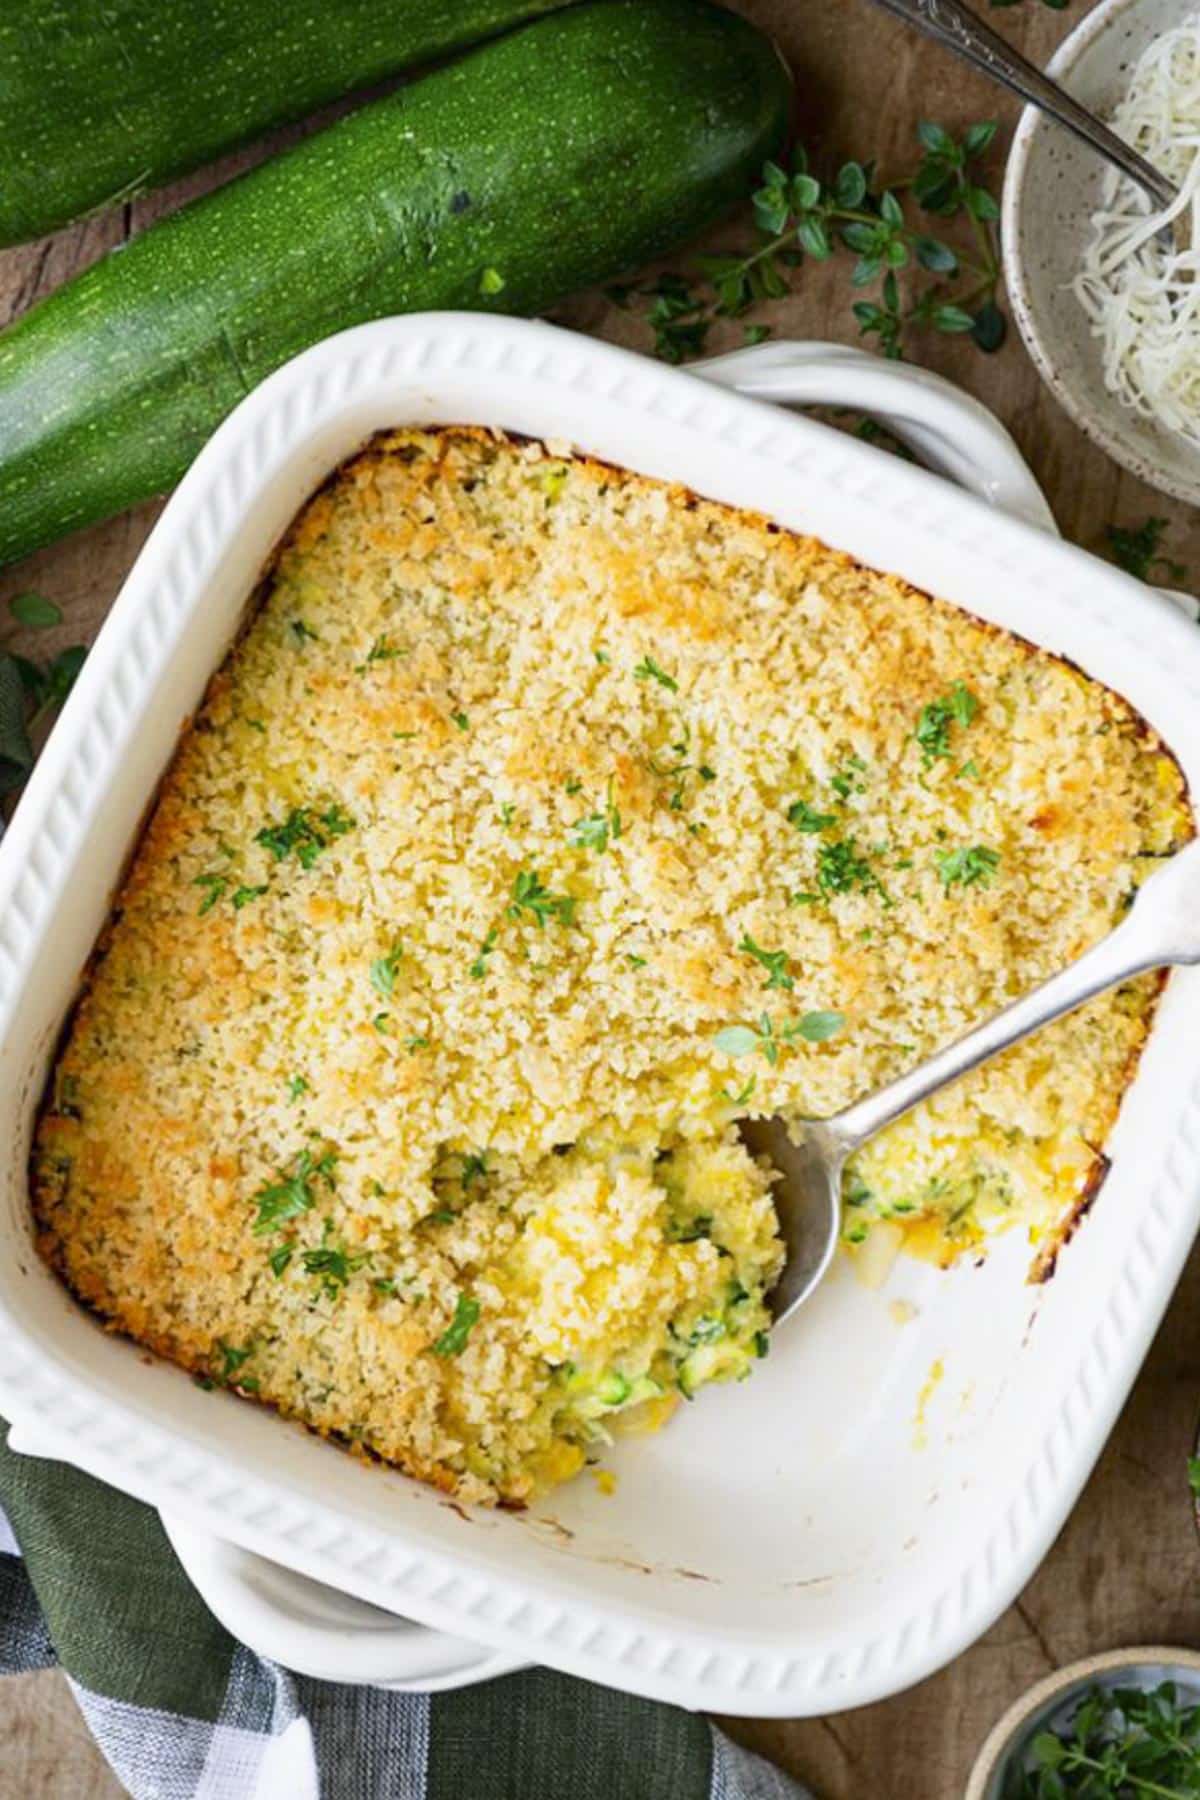 Old fashioned zucchini casserole in a white dish on a wooden table.